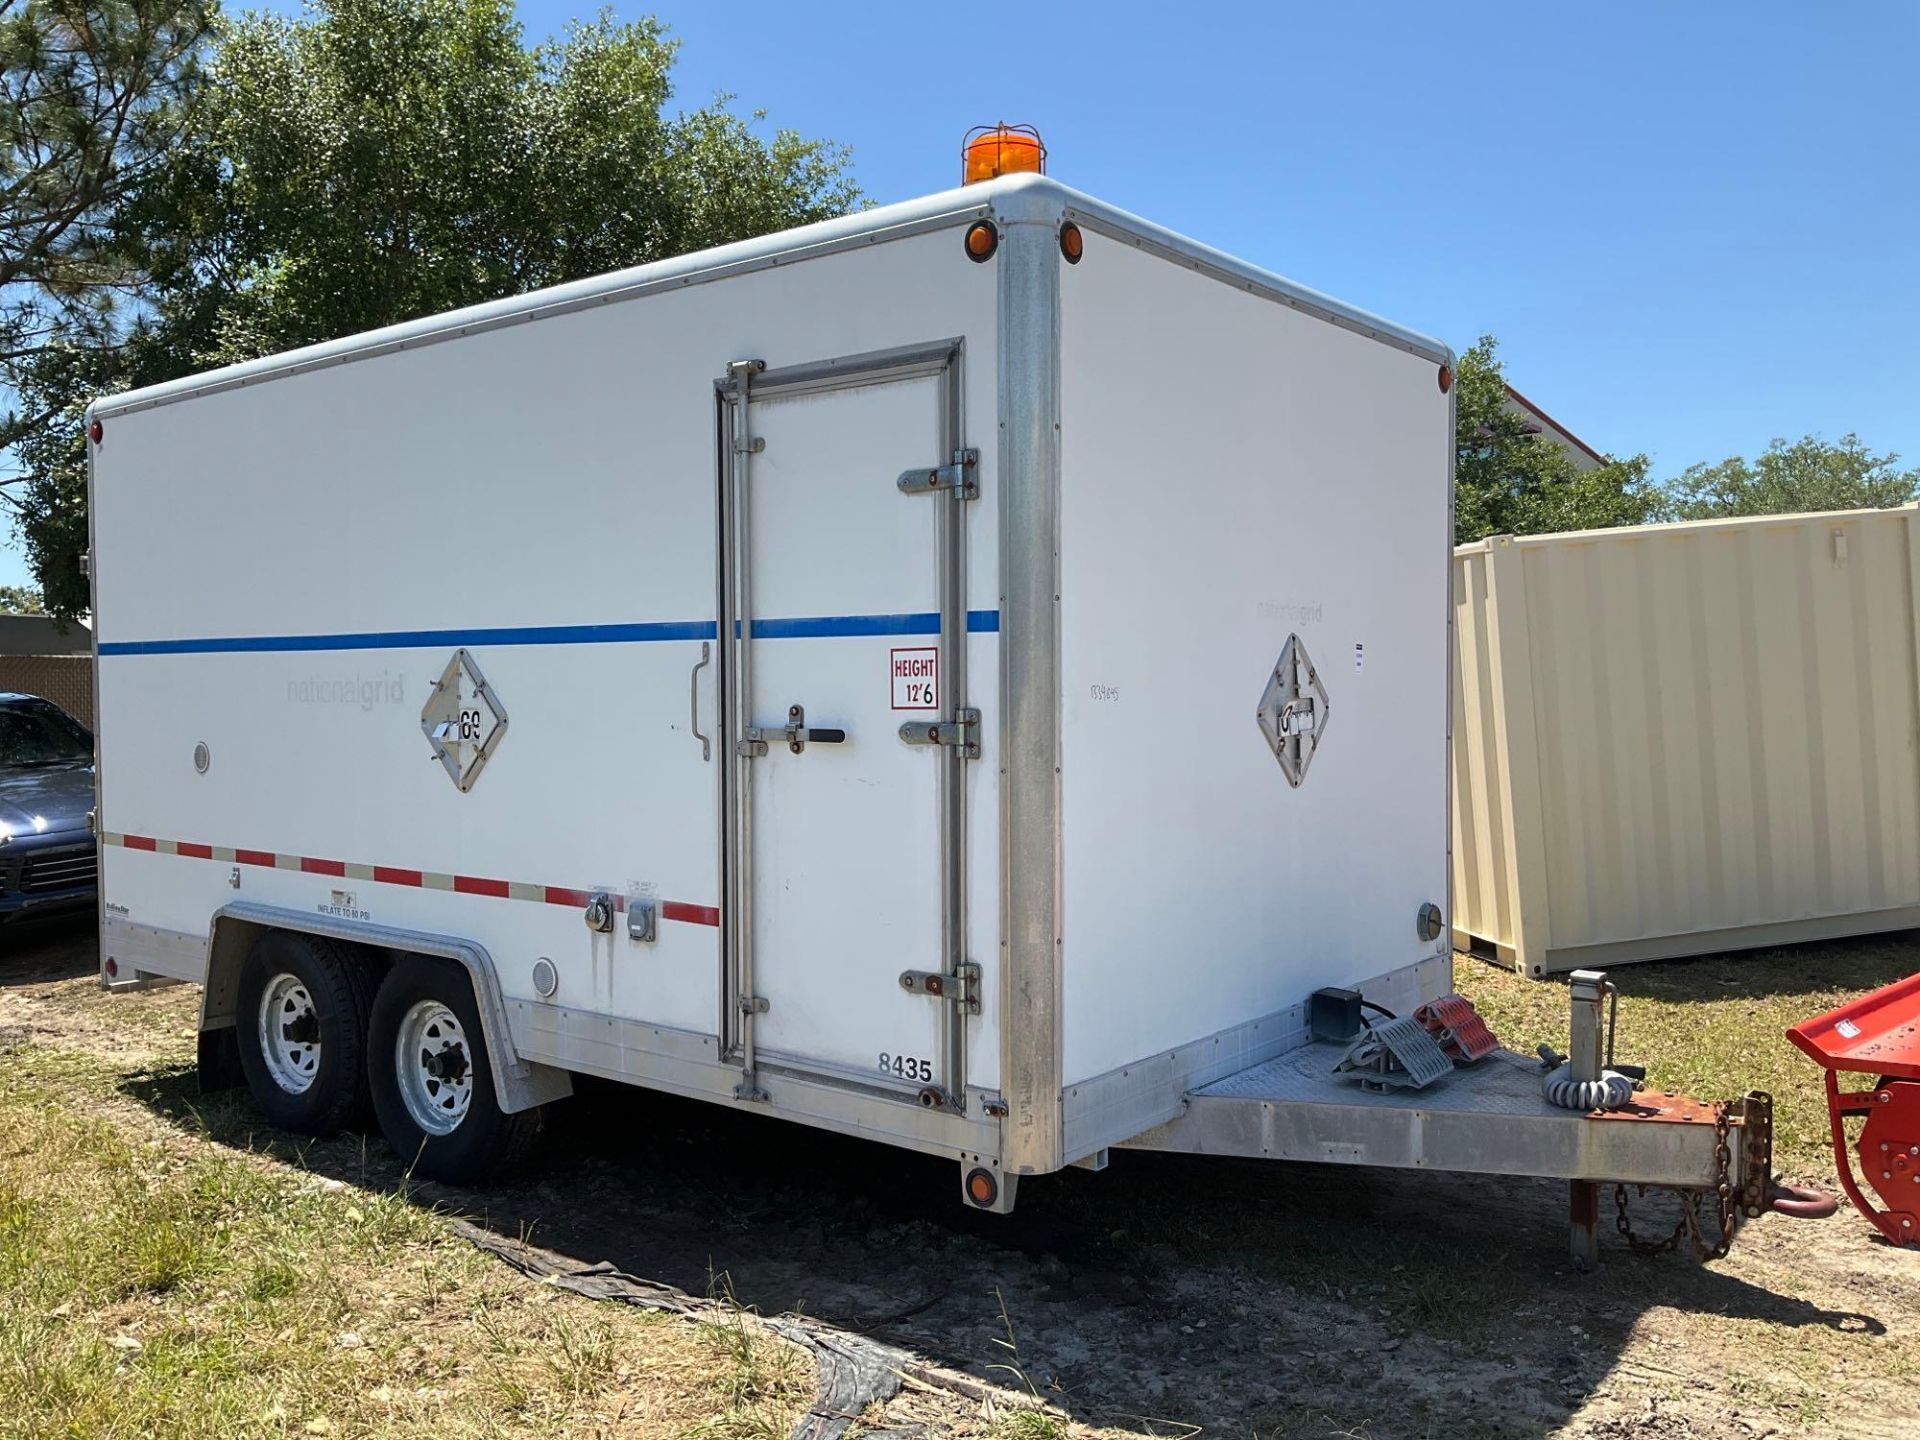 ROLLINGSTAR RS816 T/A ENCLOSED BATTERY TESTING CARGO TRAILER, APPROX GVWR 12,000, APPROX 16FT A - Image 39 of 49